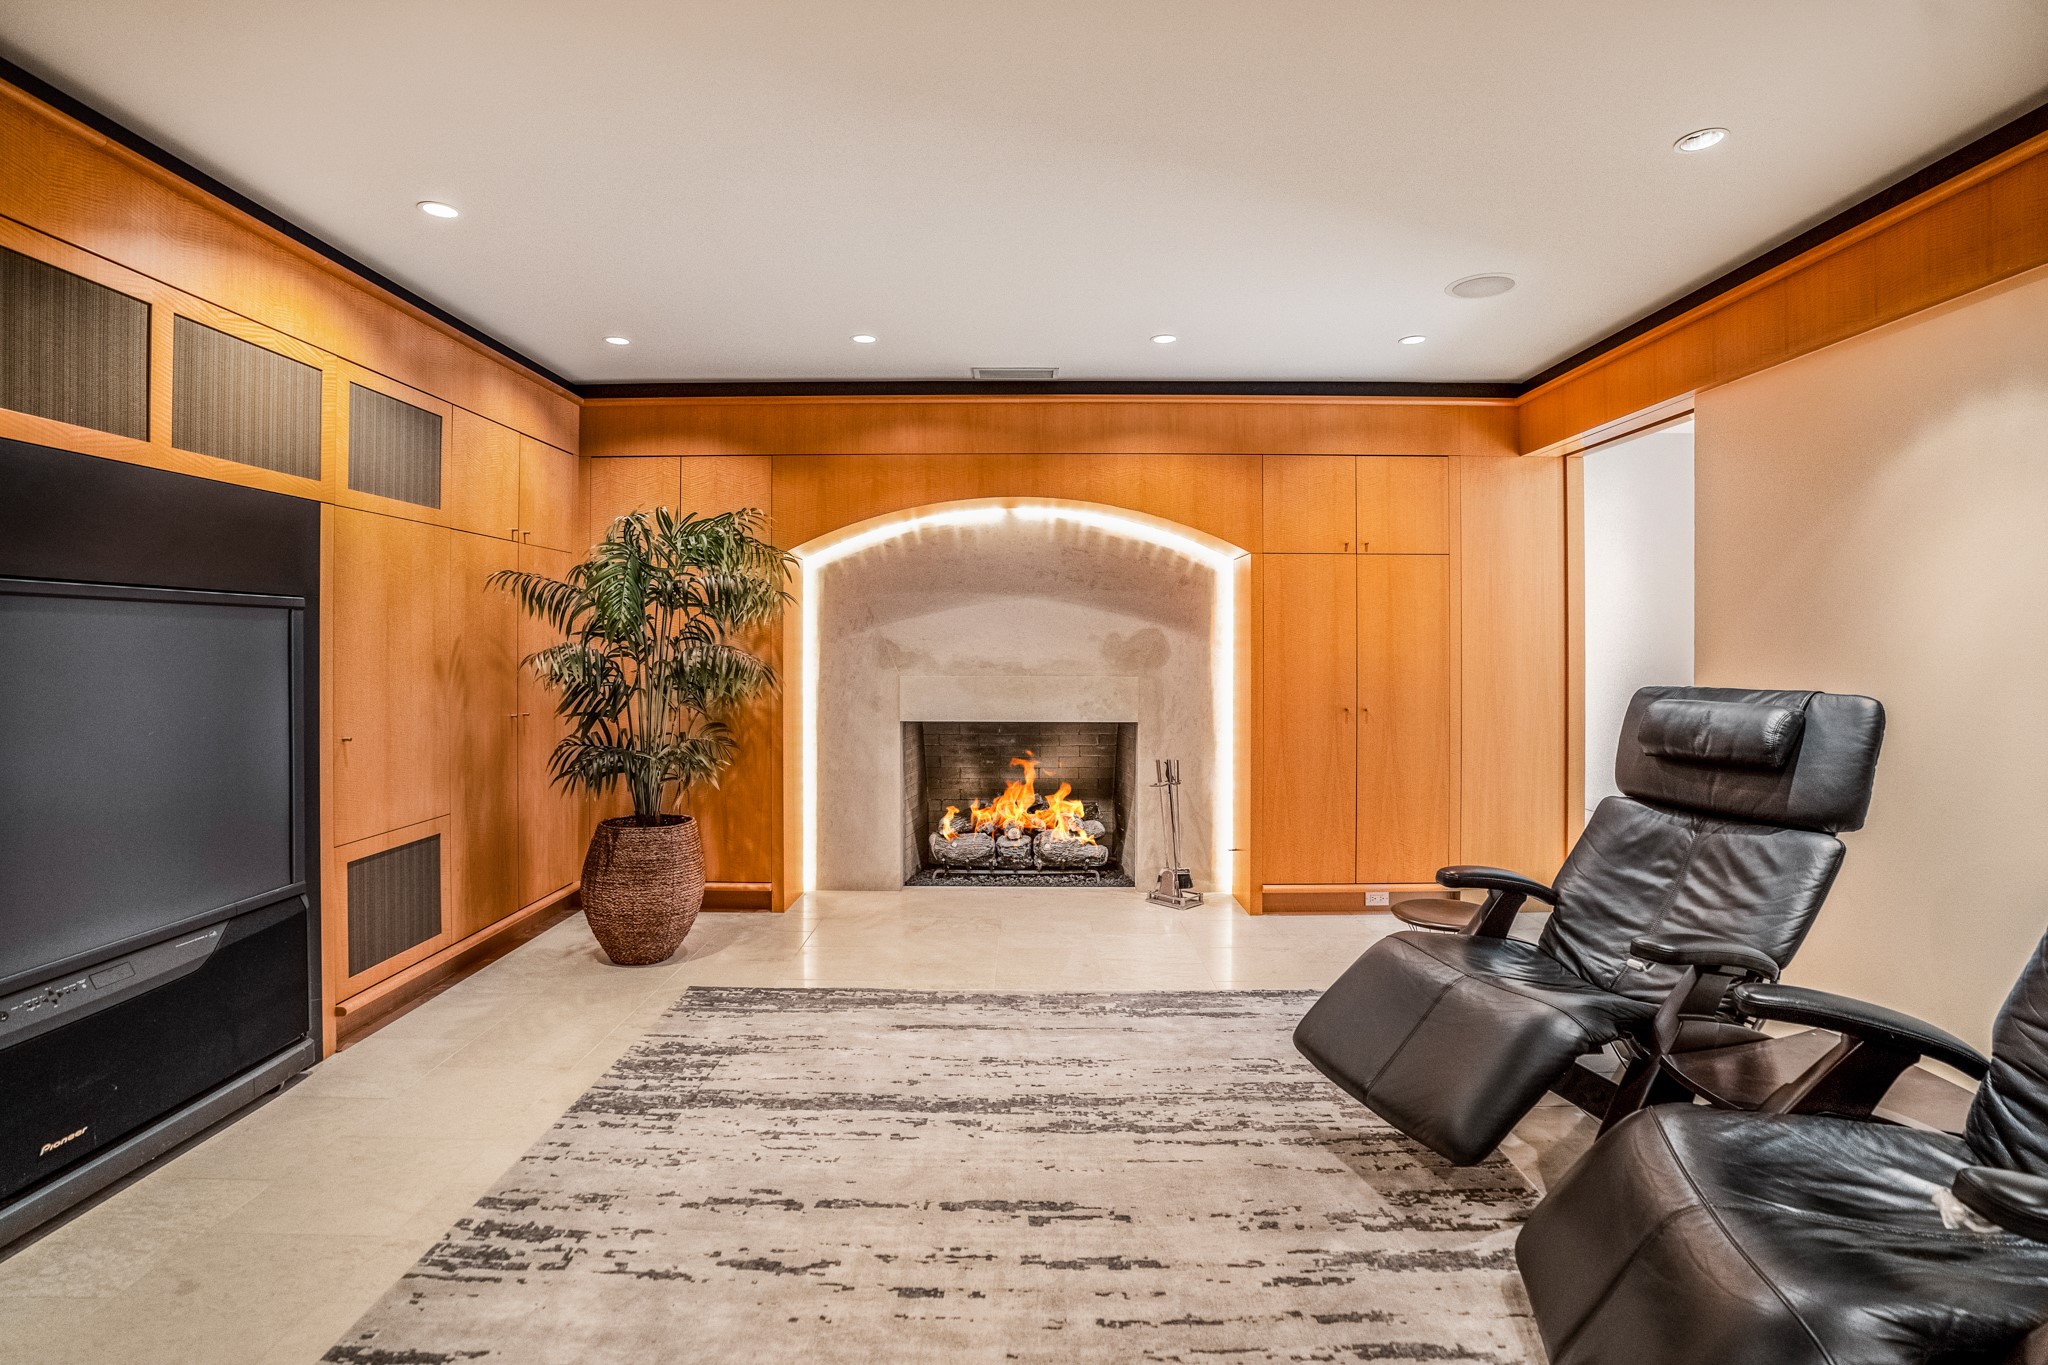 Welcome inside this stately media room/library.  Recessed lighting, gas fireplace, ample storage in the walls here.